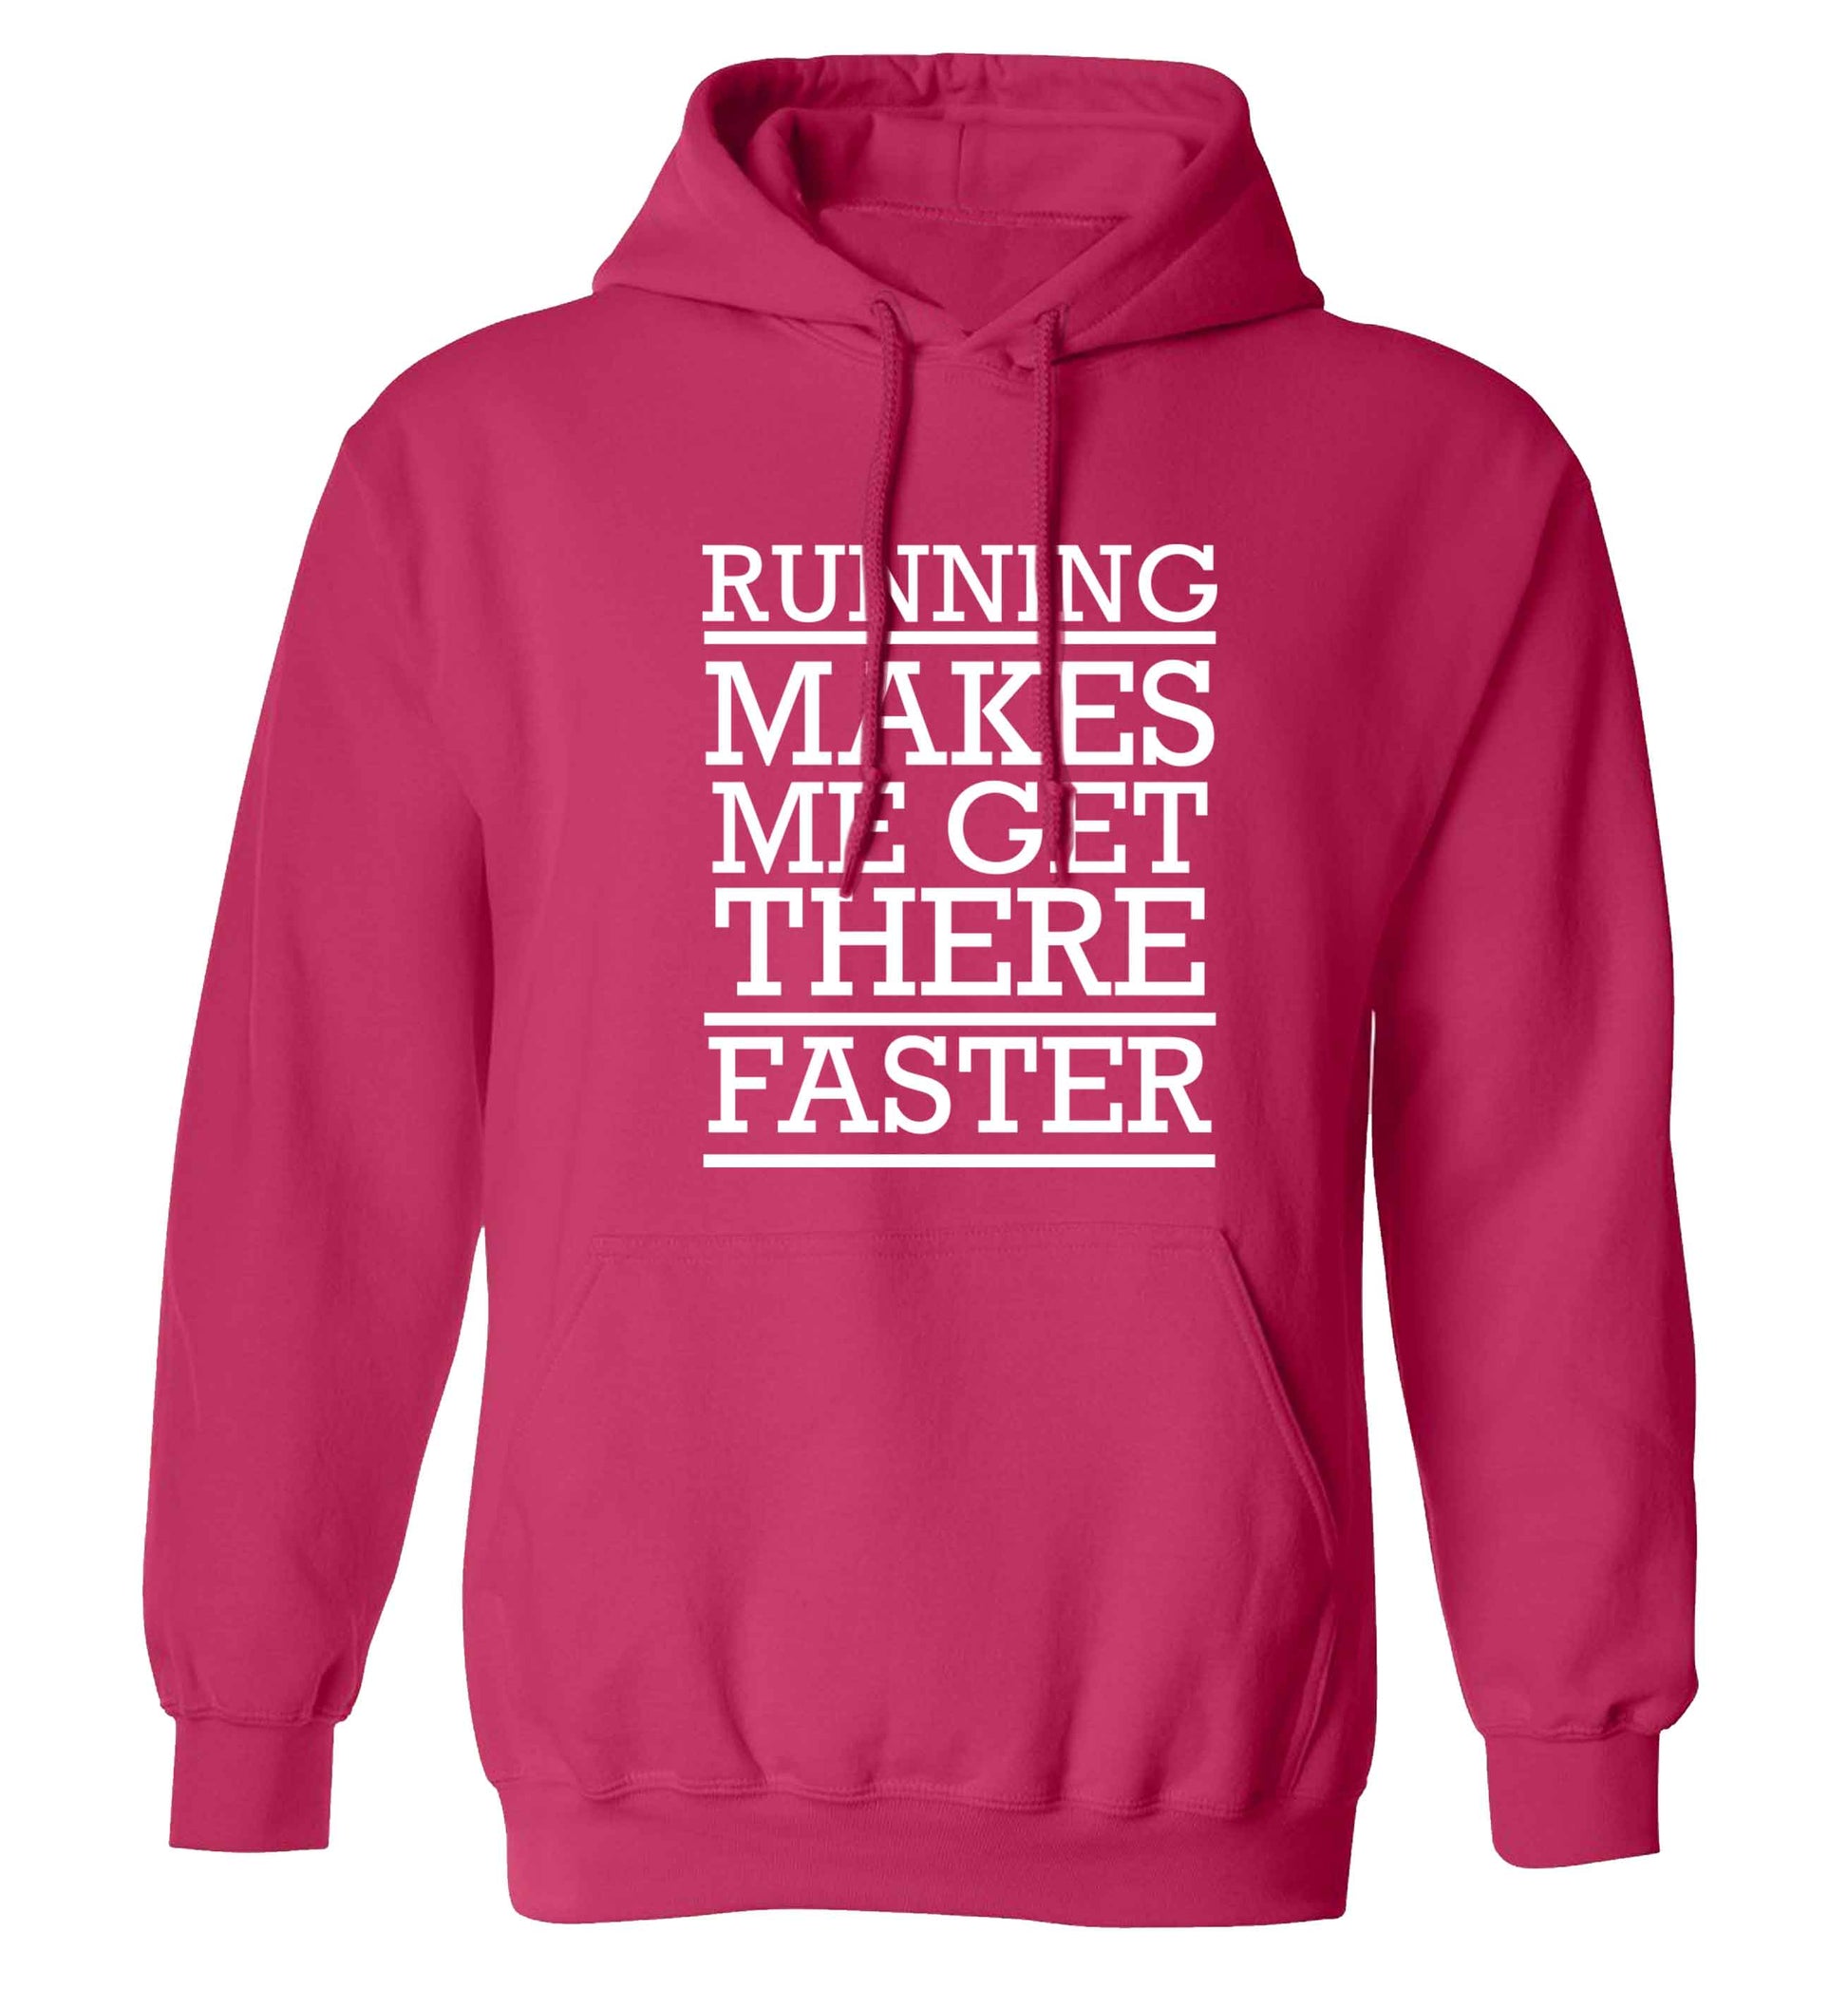 Running makes me get there faster adults unisex pink hoodie 2XL